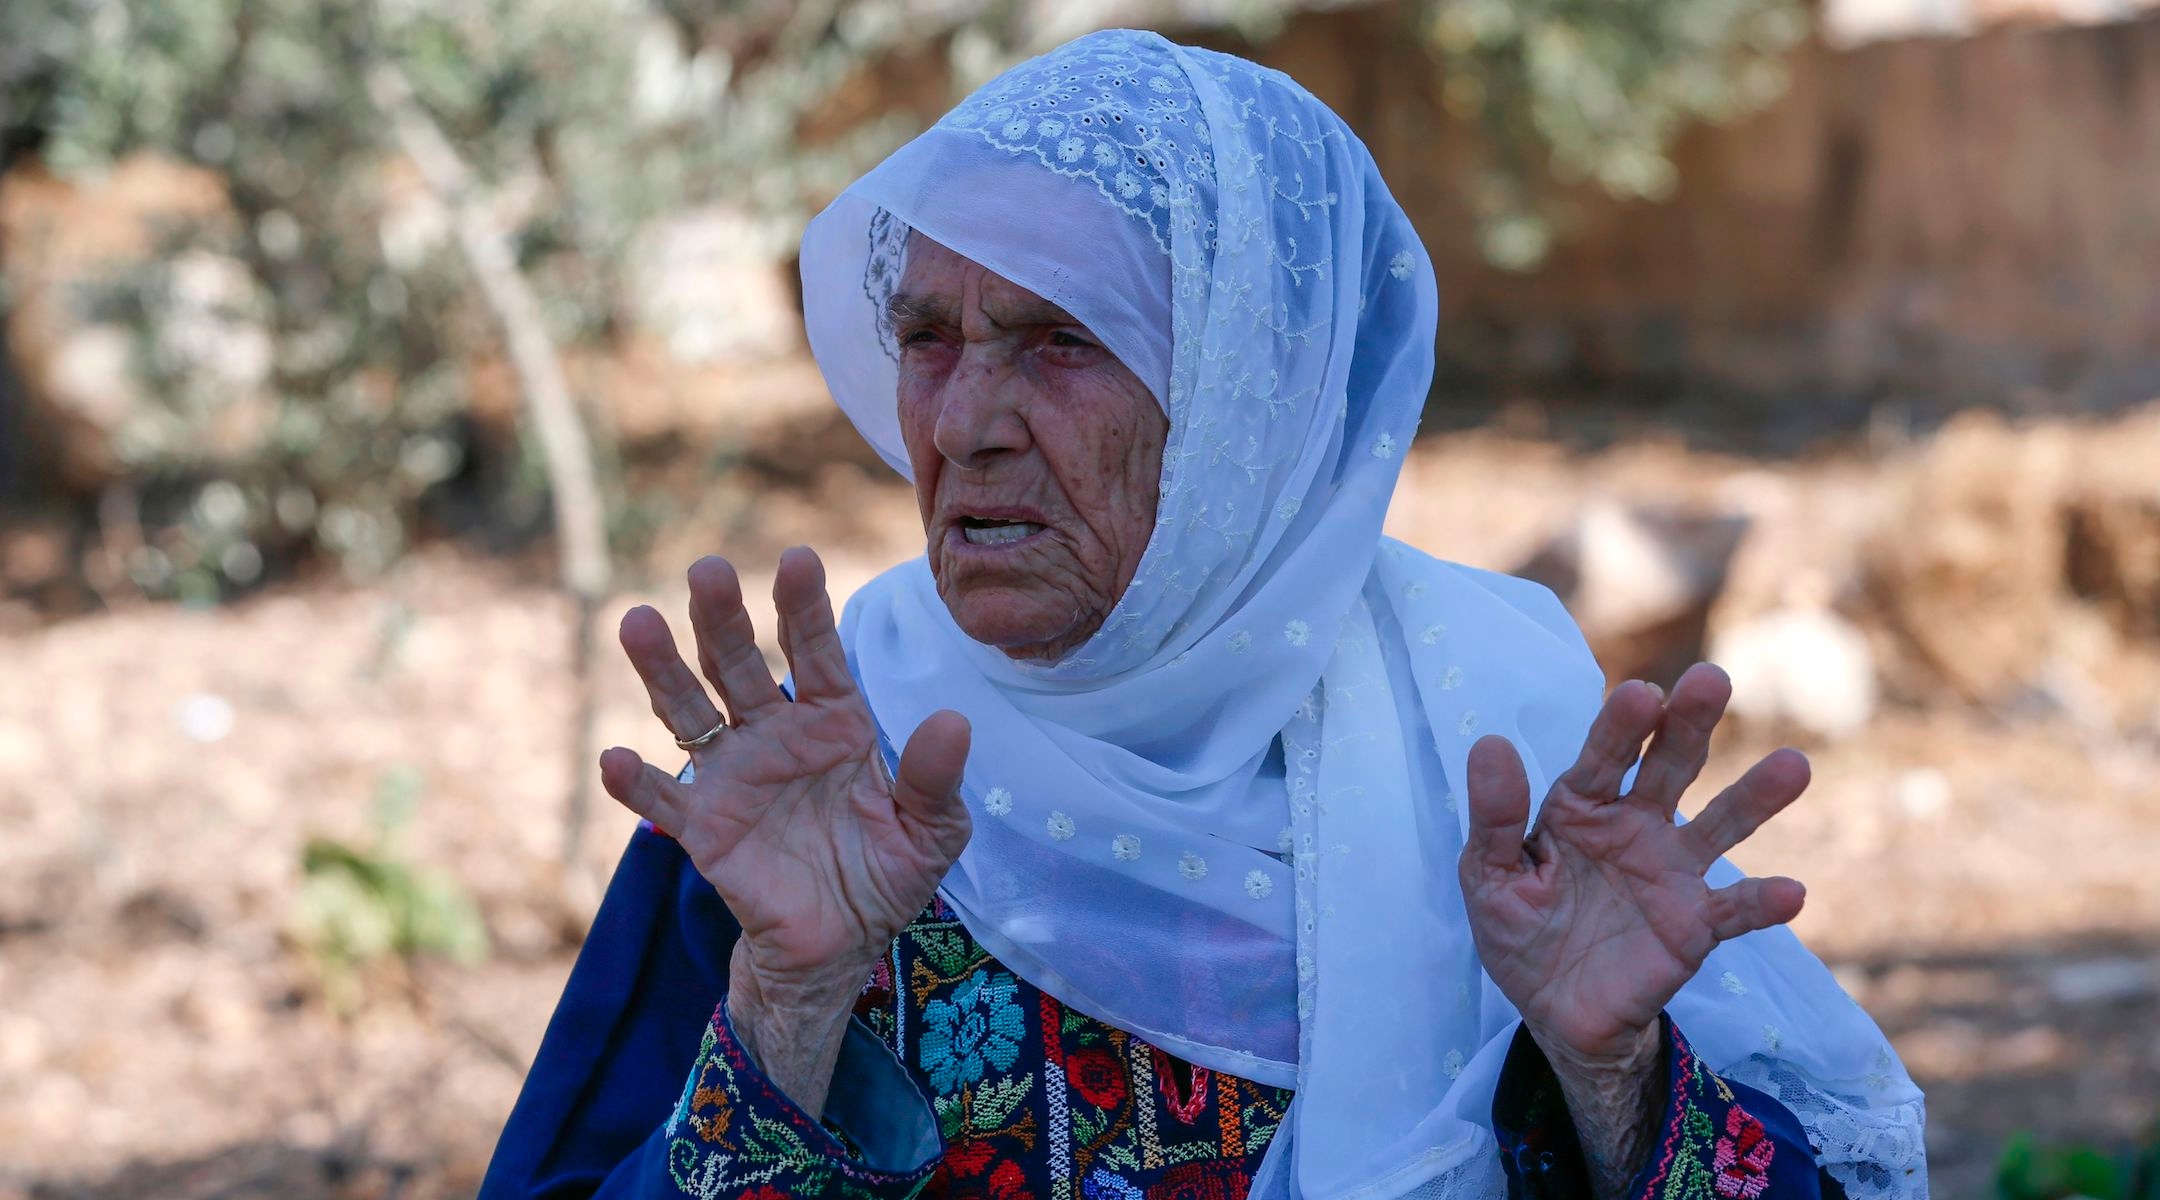 Muftia Tlaib, the maternal grandmother of Rashida Tlaib, pictured outside her home in the village of Beit Ur al-Fauqa, in the West Bank, Aug. 15, 2019. (Abbas Momani/AFP/Getty Images)